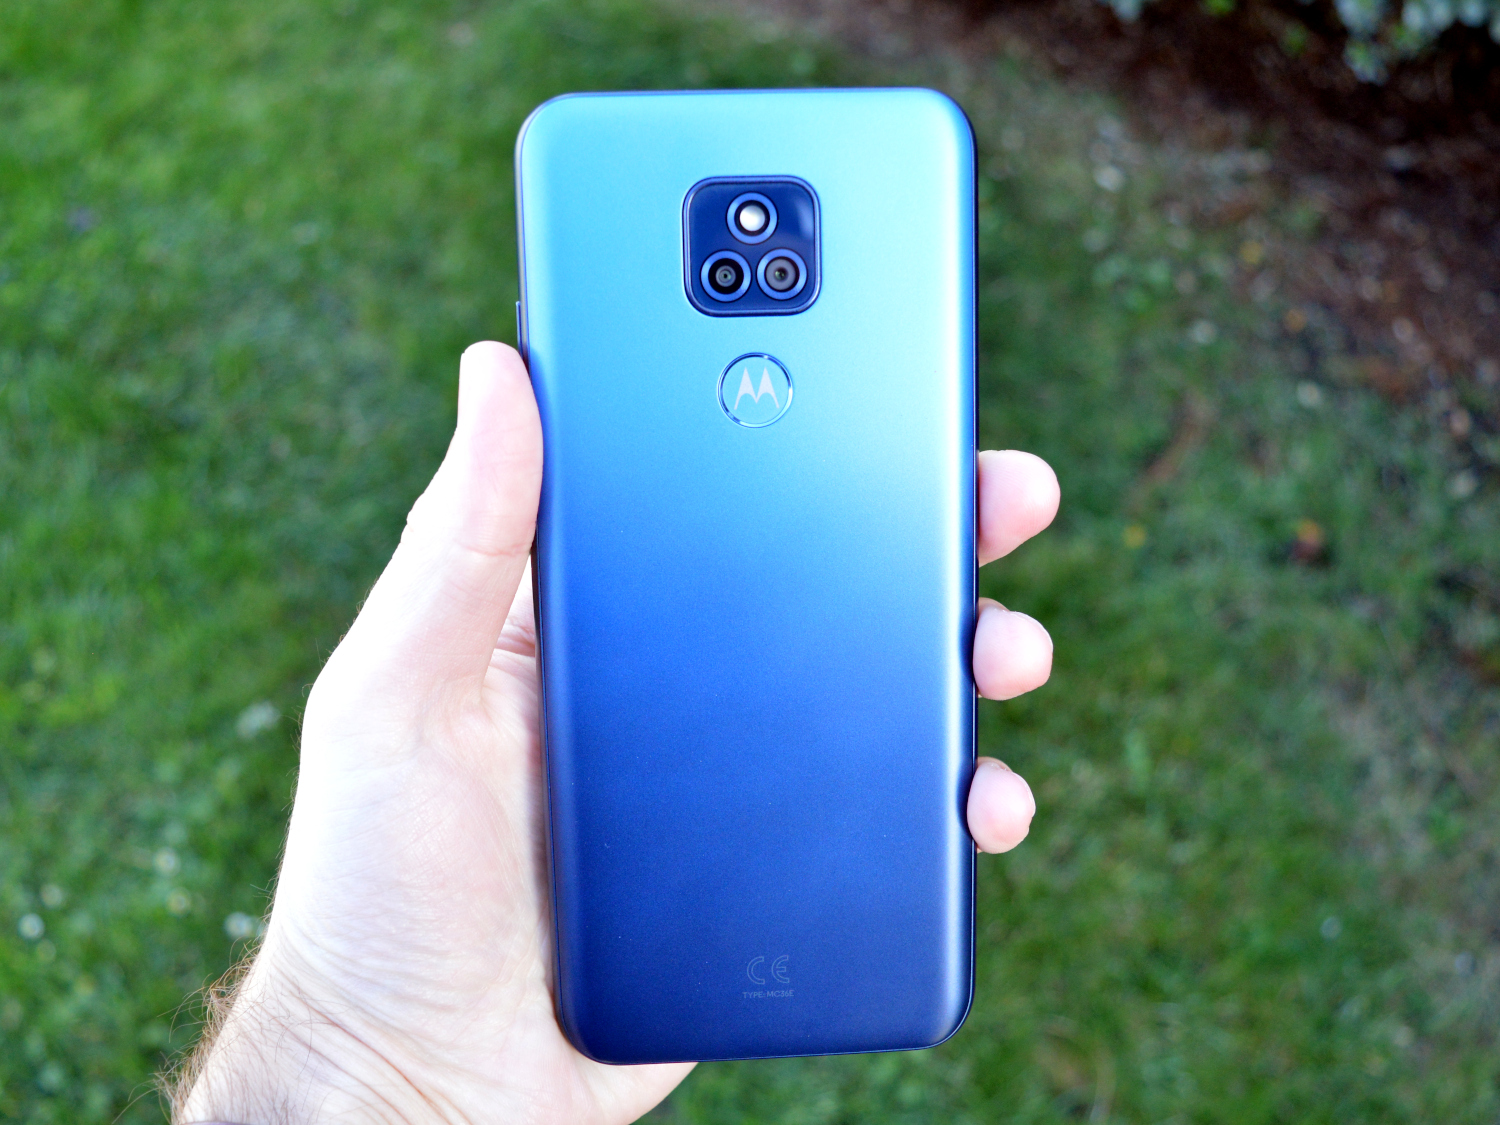 Images and basic specs of Moto G Power (2021) and Moto G Play